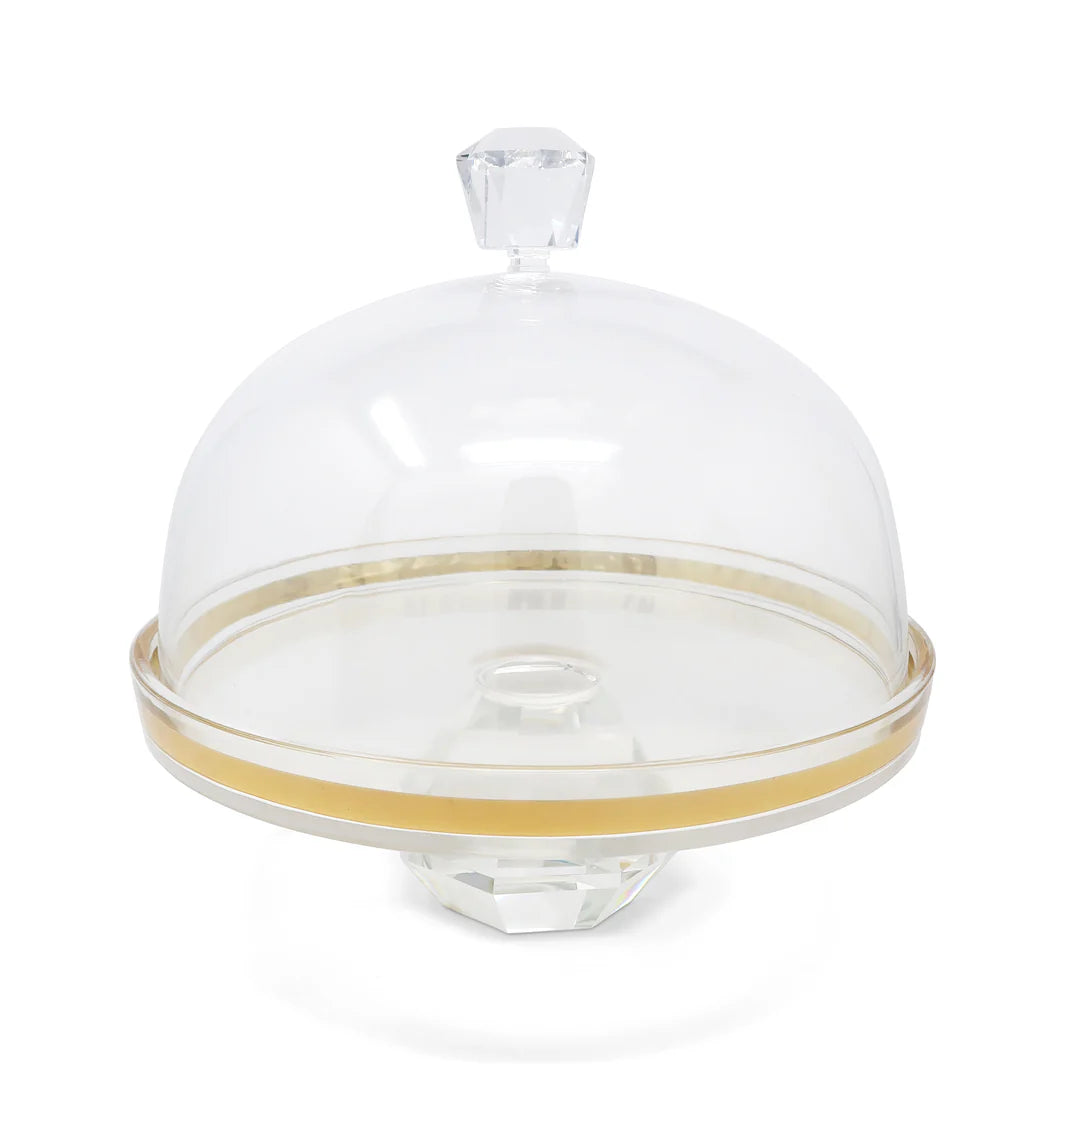 Glass Cake Dome With Colored Diamond Base And Knob, 13"D
VCP5088